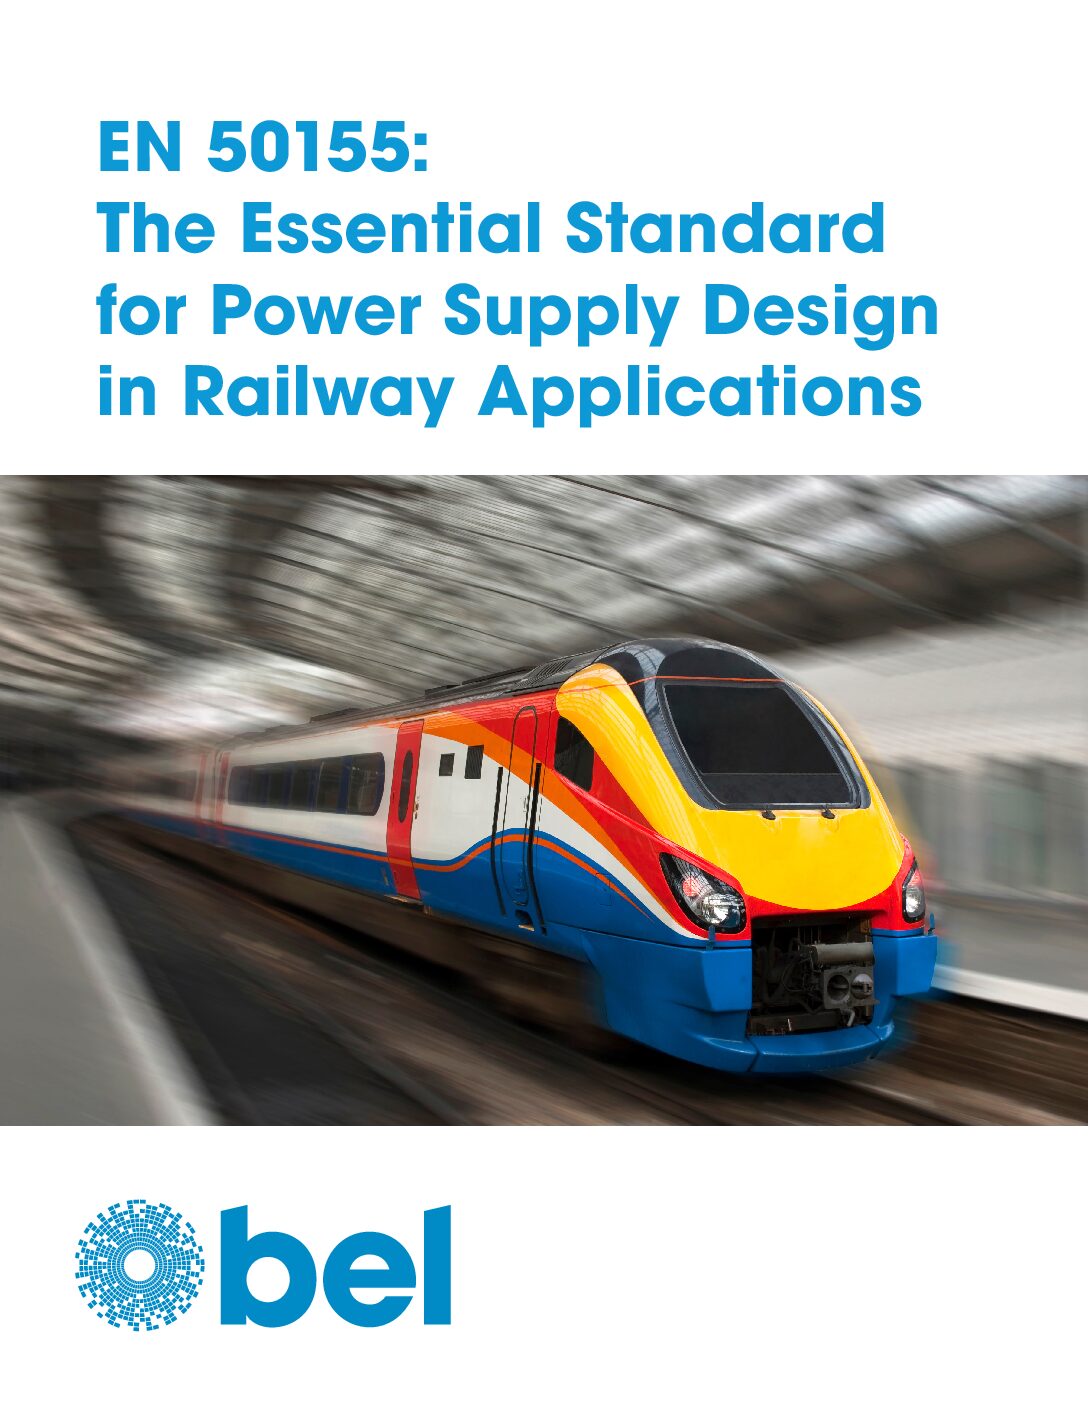 EN 50155: The Essential Standard for Power Supply Design in Railway Applications